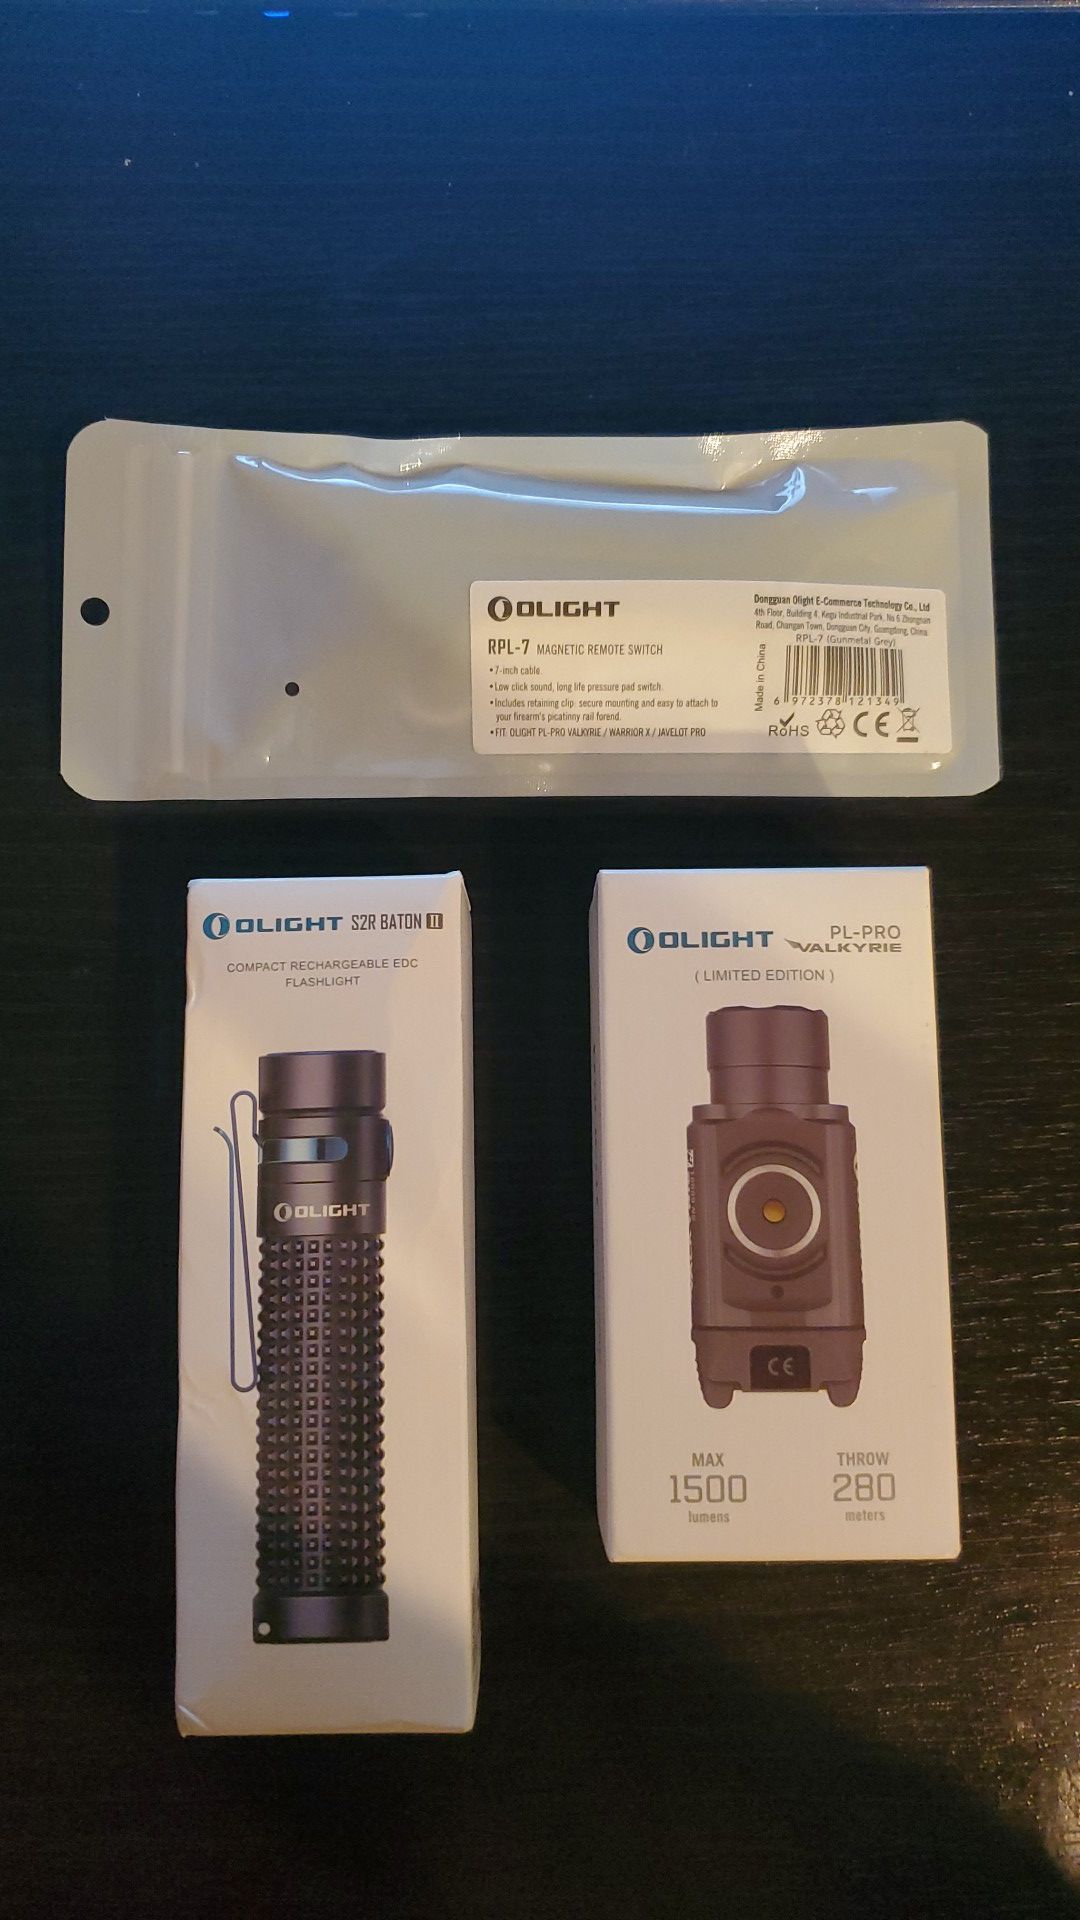 Olight PL-Pro Valkyrie (Limited Edition), picatinny magnetic switch and S2R baton II